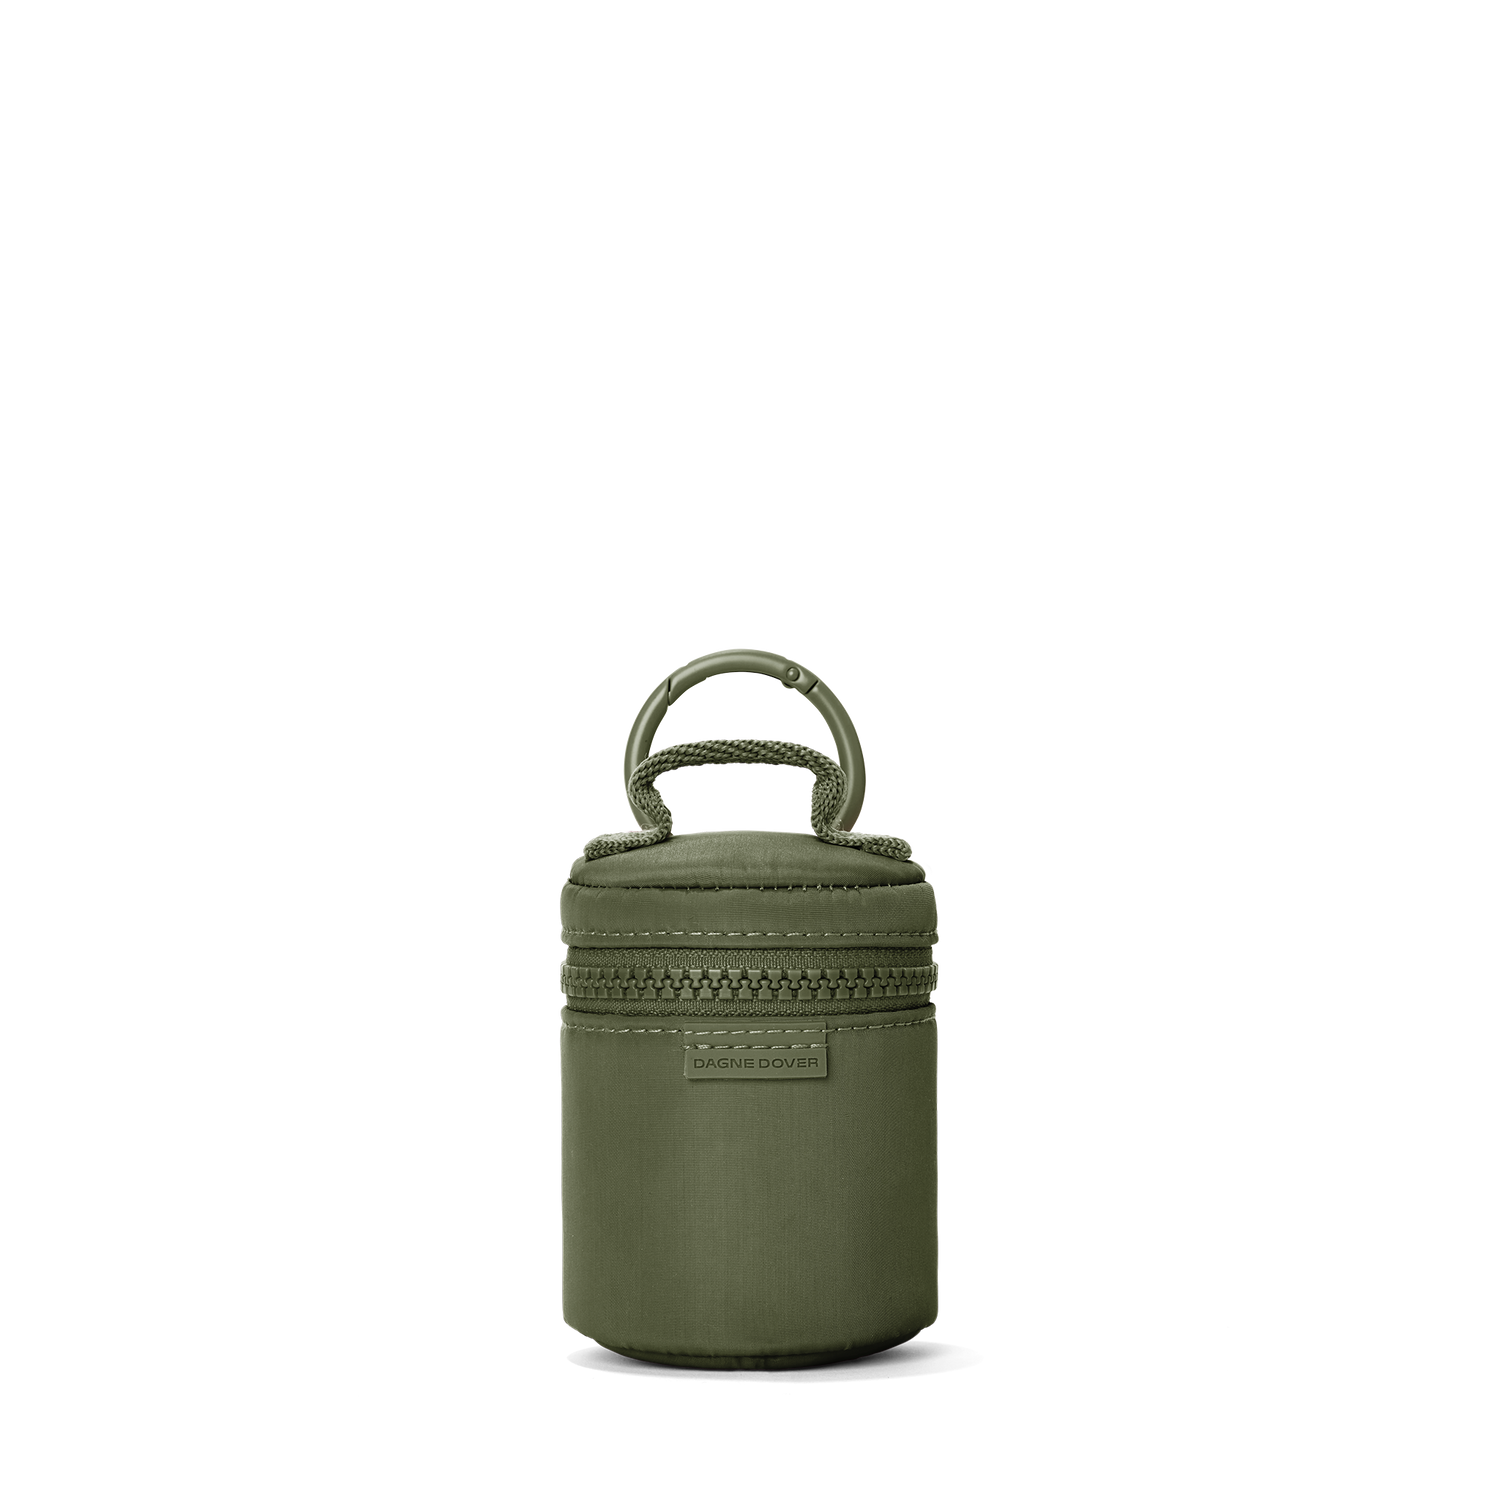 Dagne Dover - The Landon Carryall is ready to do triple duty; gym